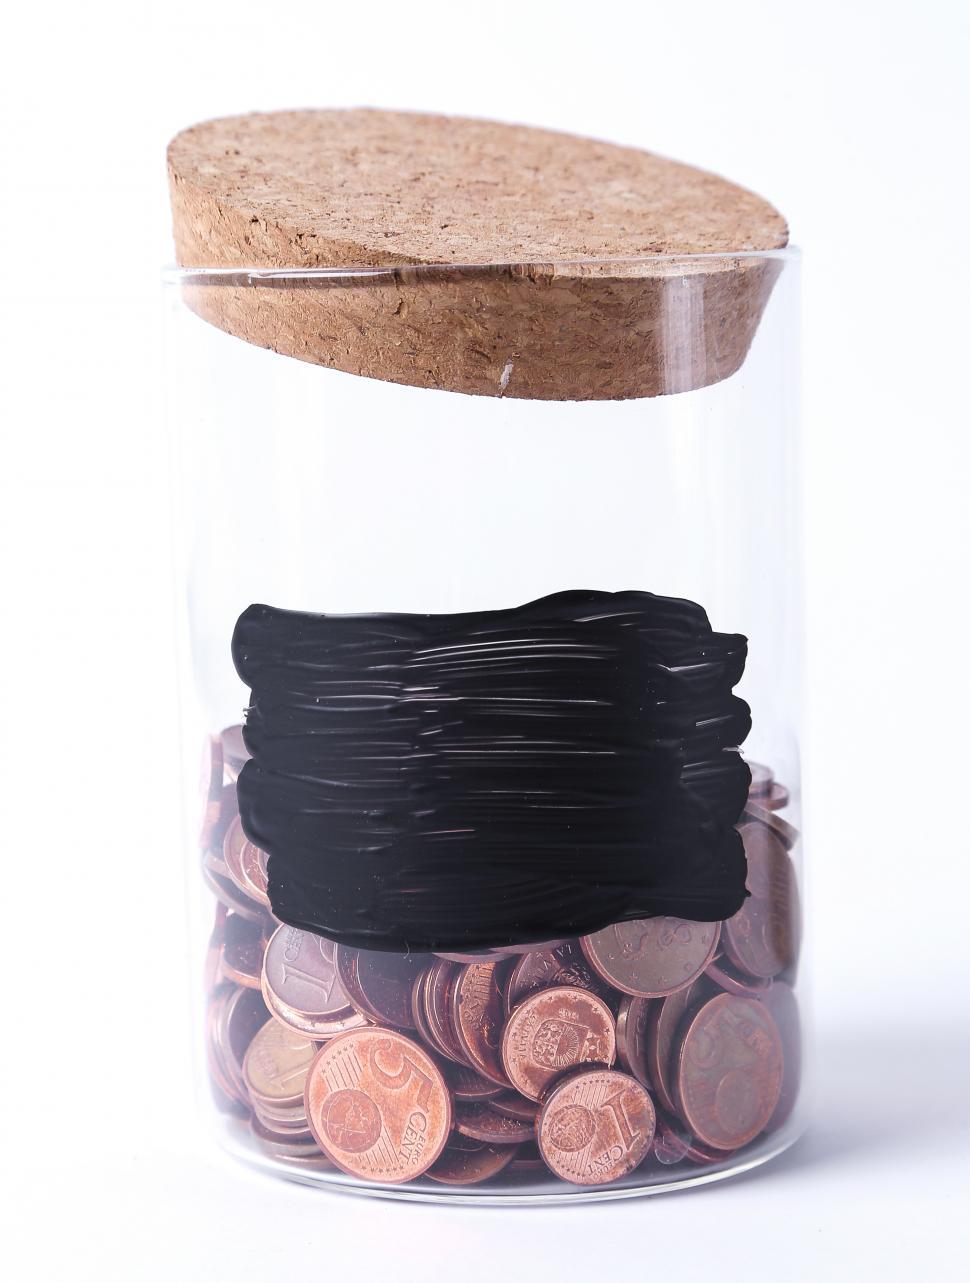 Free Image of Jar for coins with black label 